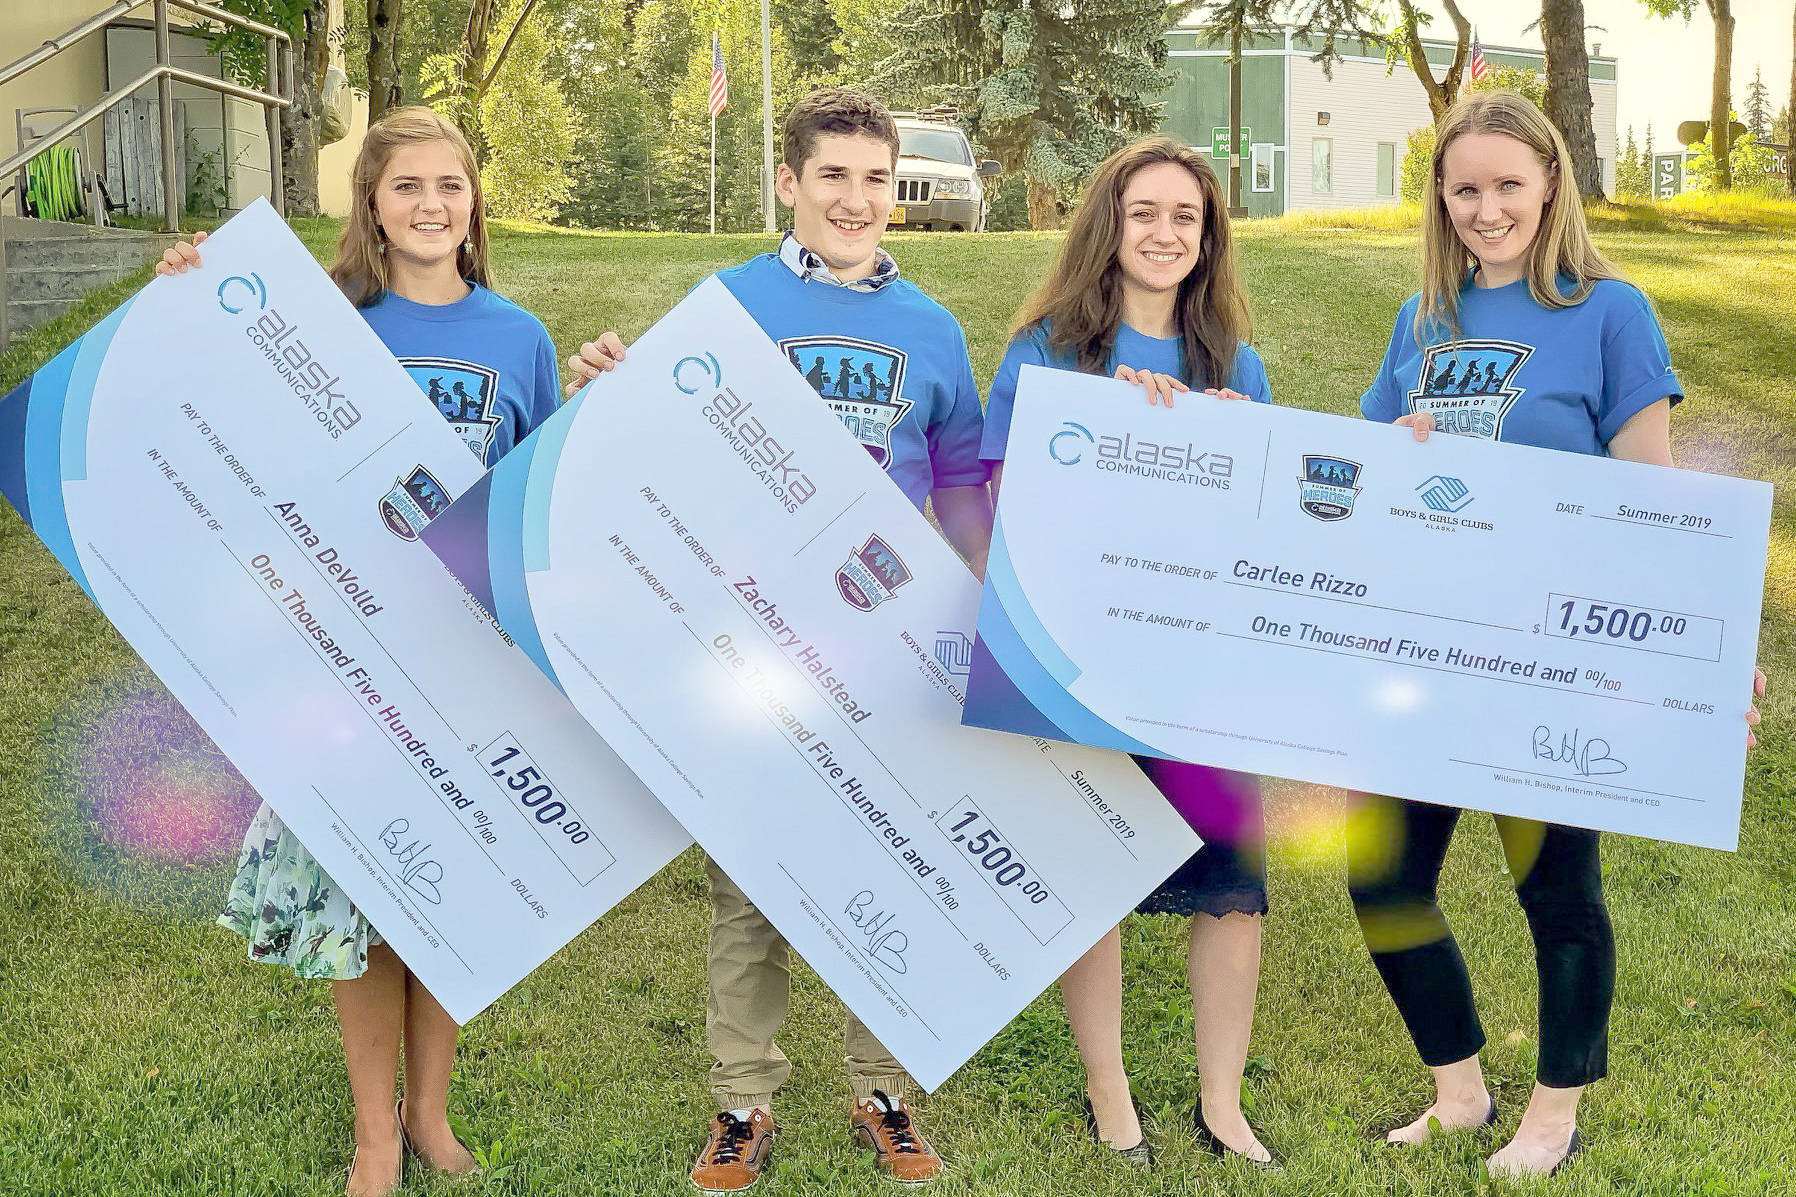 Heather Marron of Alaska Communications presents the $1,500 awards to three peninsula teens (from right) — Anna DeVolld, Zachary Halstead and Carlee Rizzo — who were honored in the Summer of Heroes program, on Monday, Aug. 5, 2019, in Soldotna, Alaska. (Photo courtesy of Pegge Erkeneff/Kenai Peninsula Borough School District)